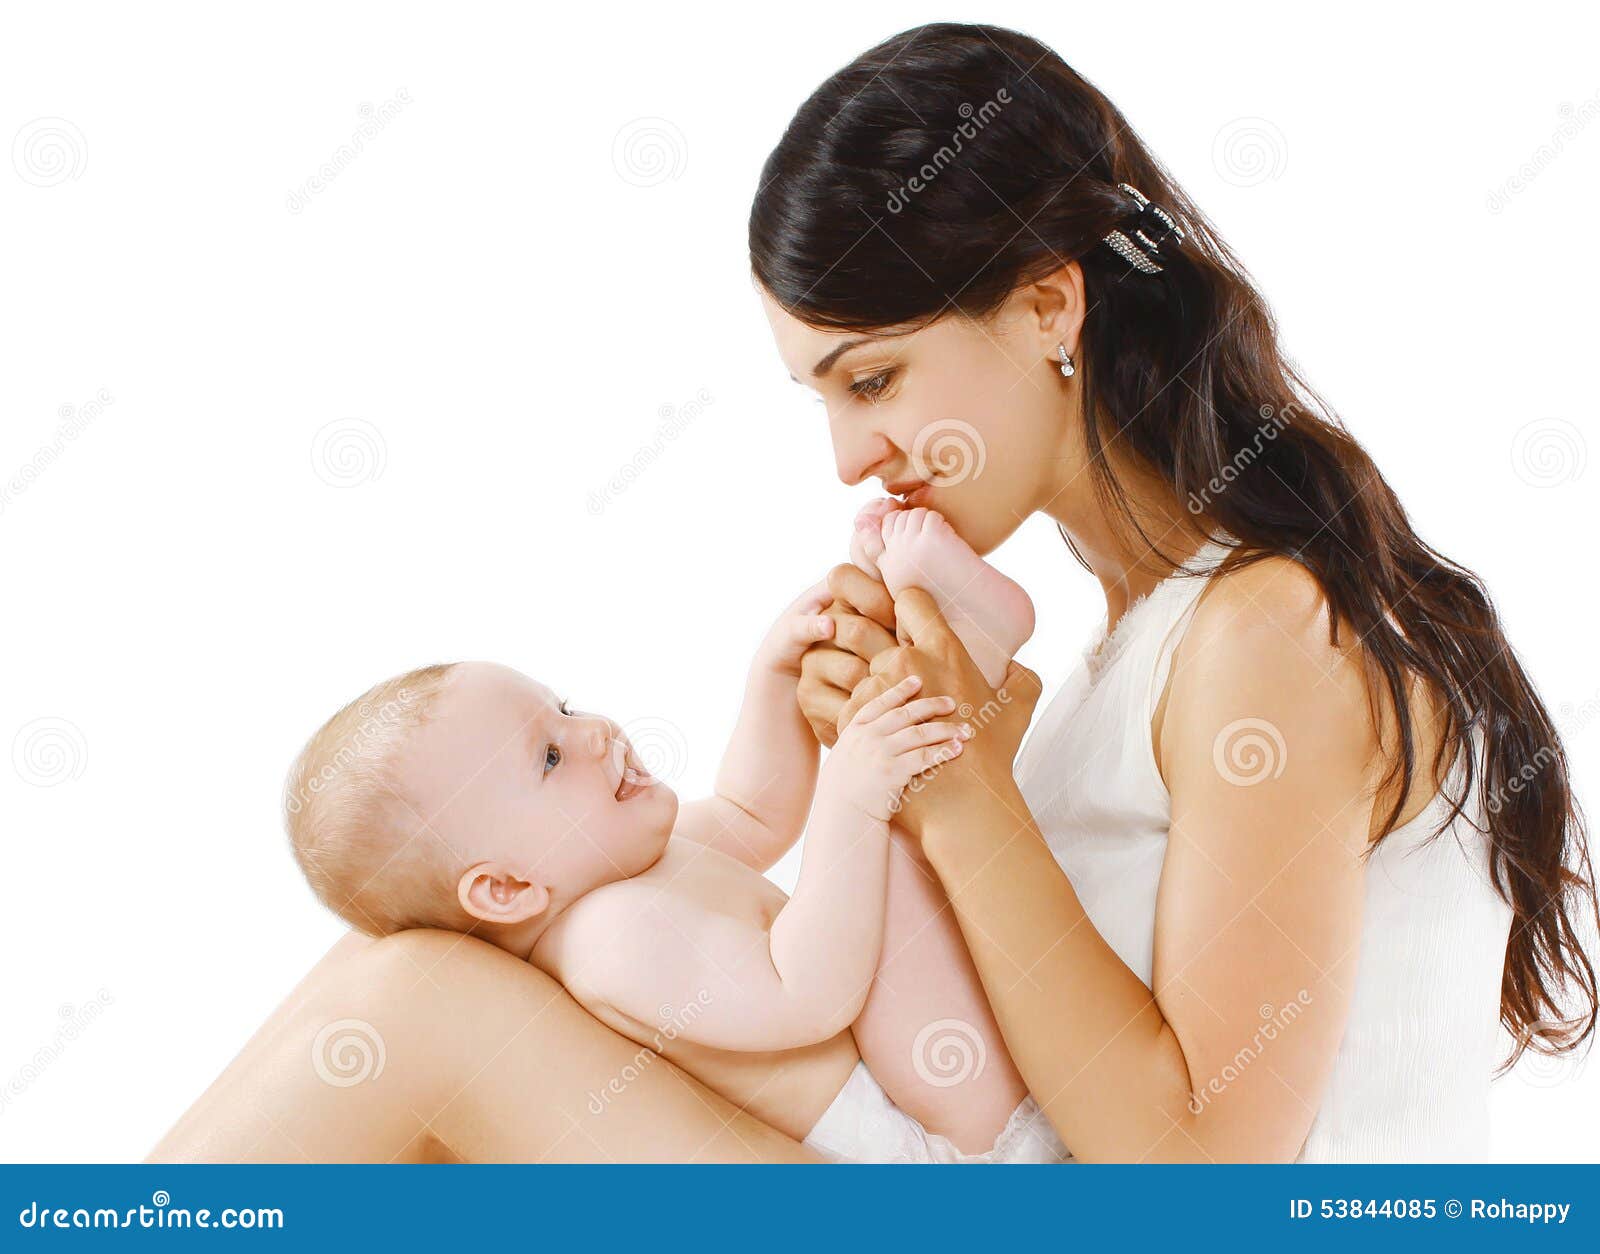 Happy Loving Mother Playing with Cute Baby Stock Image - Image of ...